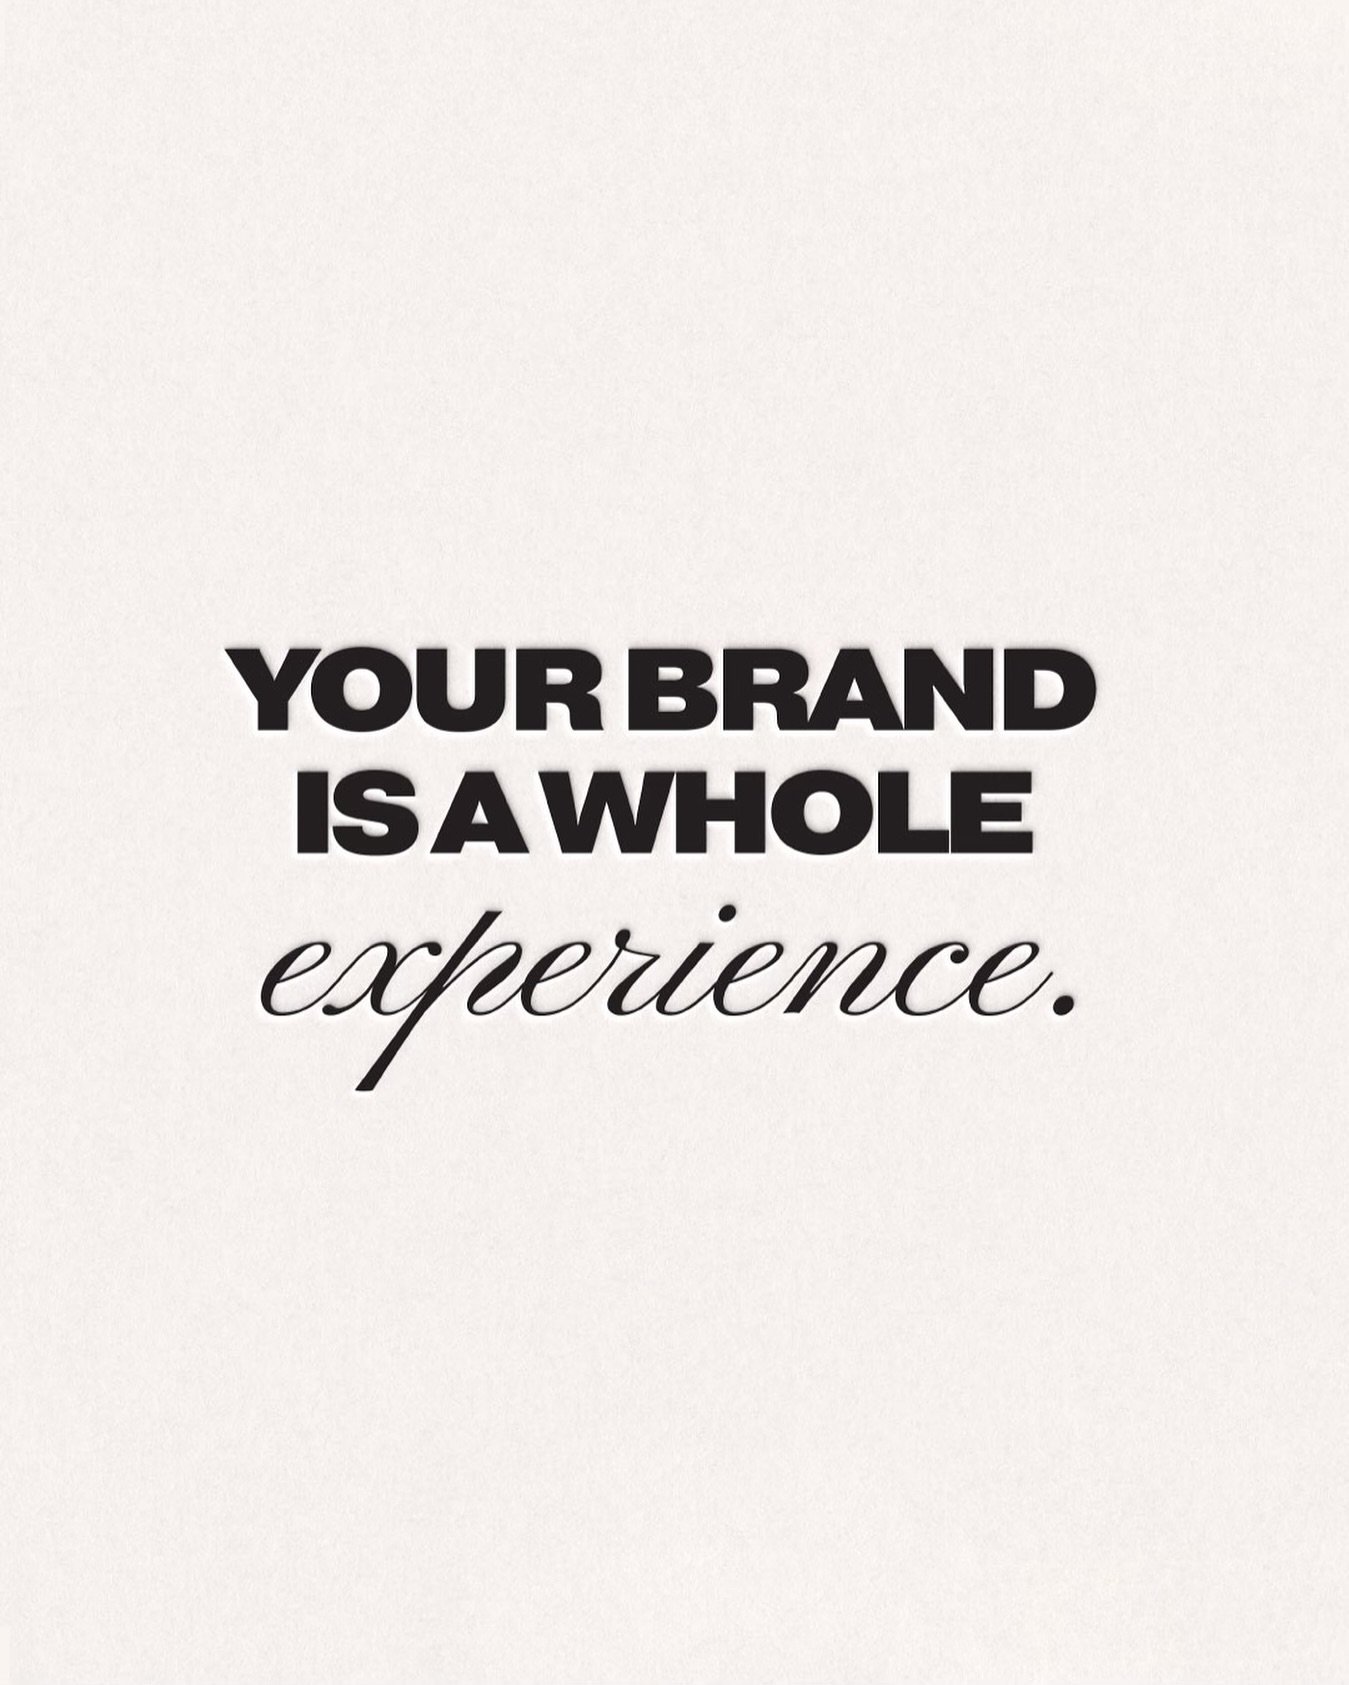 Your brand isn&rsquo;t just a logo or a product&mdash;it&rsquo;s a journey, a complete experience that speaks directly to the hearts of your audience. It&rsquo;s about emotions, connections, and values woven seamlessly into every touchpoint, making e